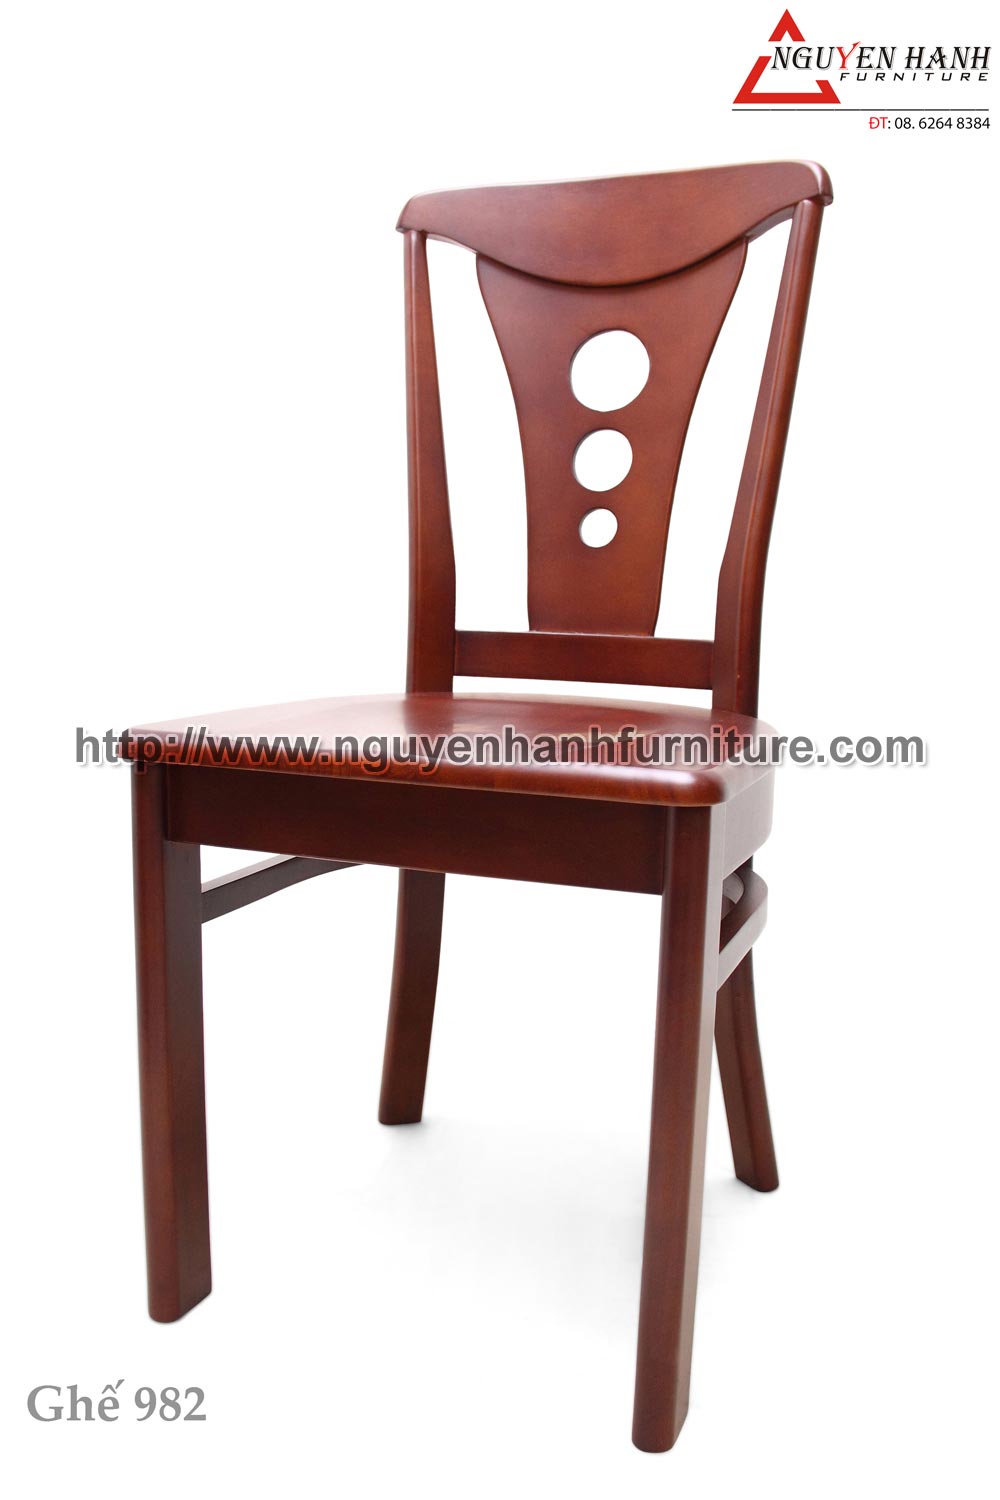 Name product: 982 chair